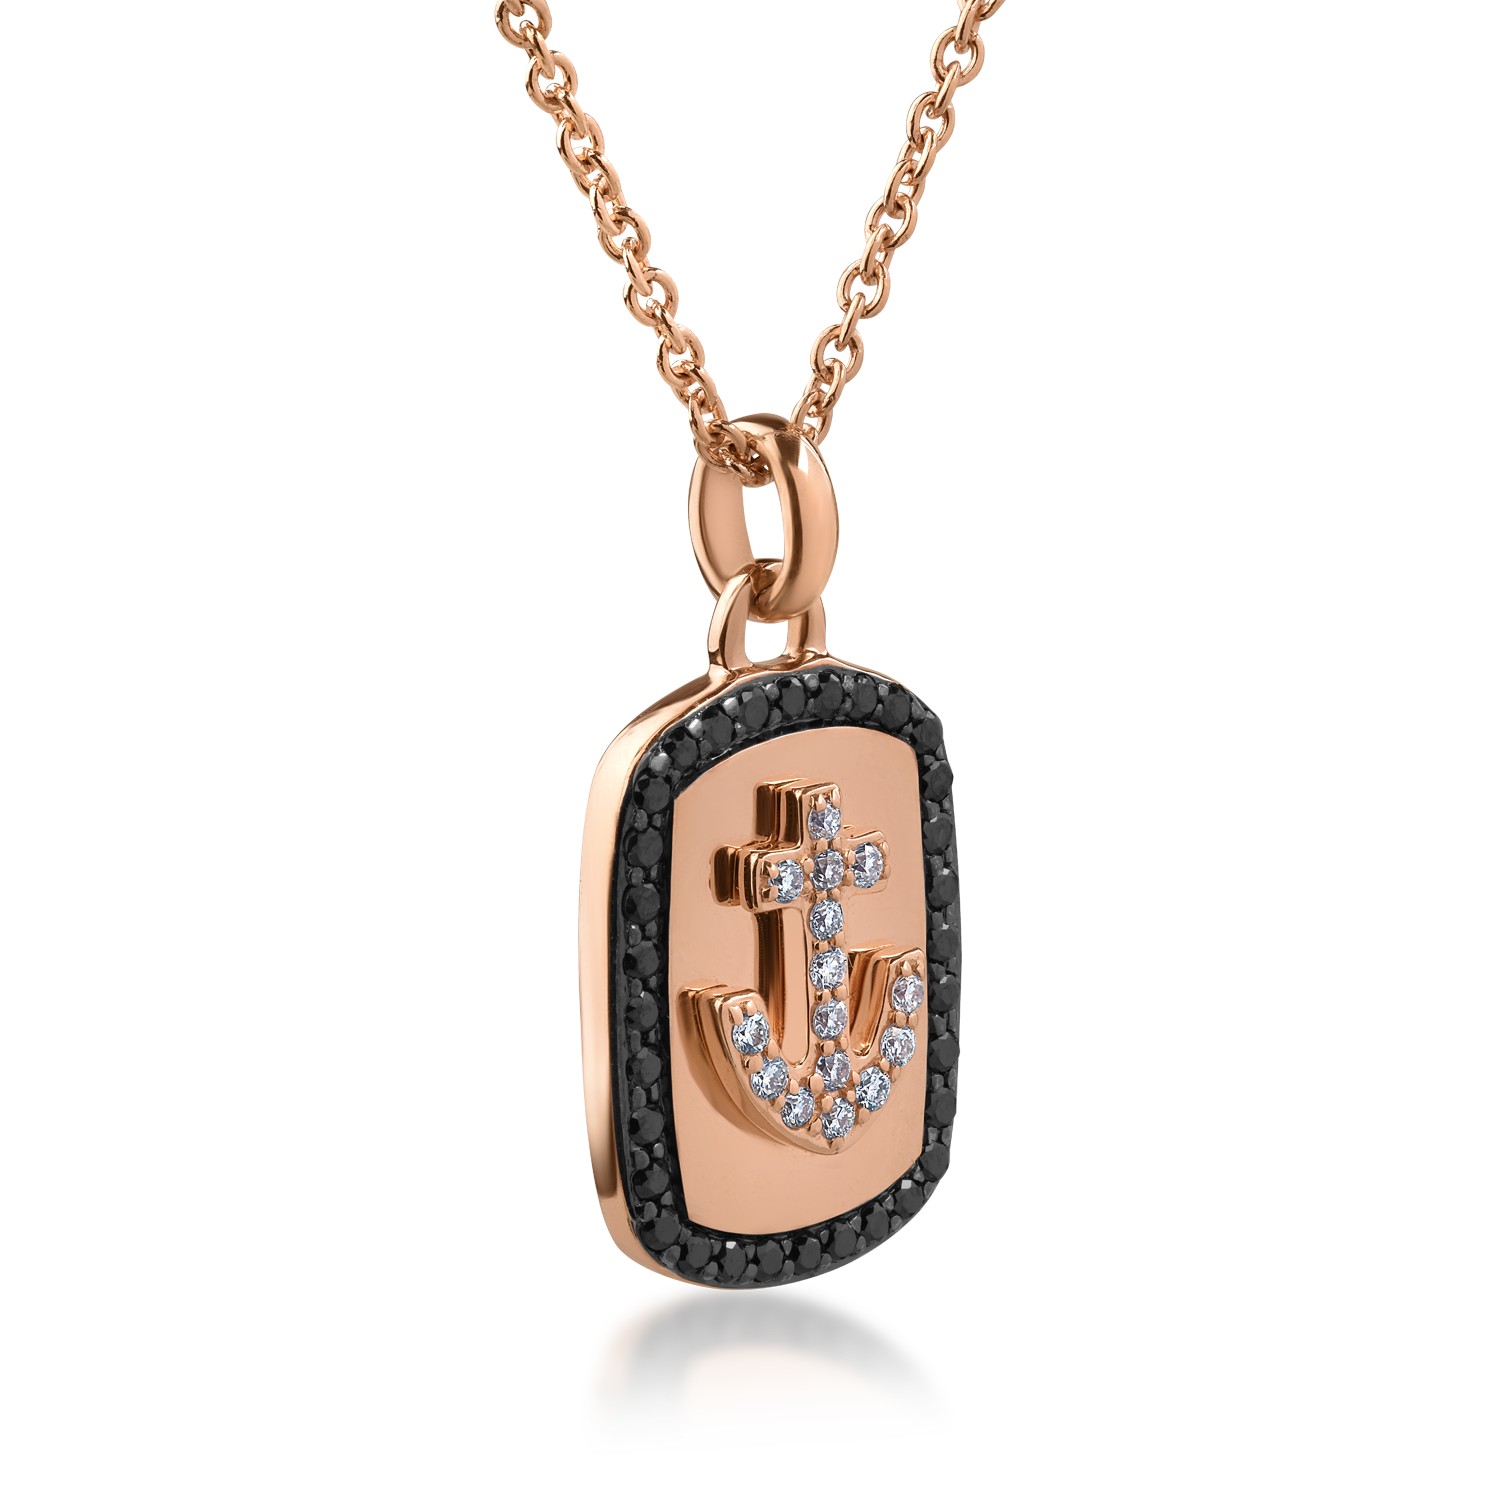 18K rose gold pendant necklace with 0.25ct black diamonds and 0.11ct clear diamonds